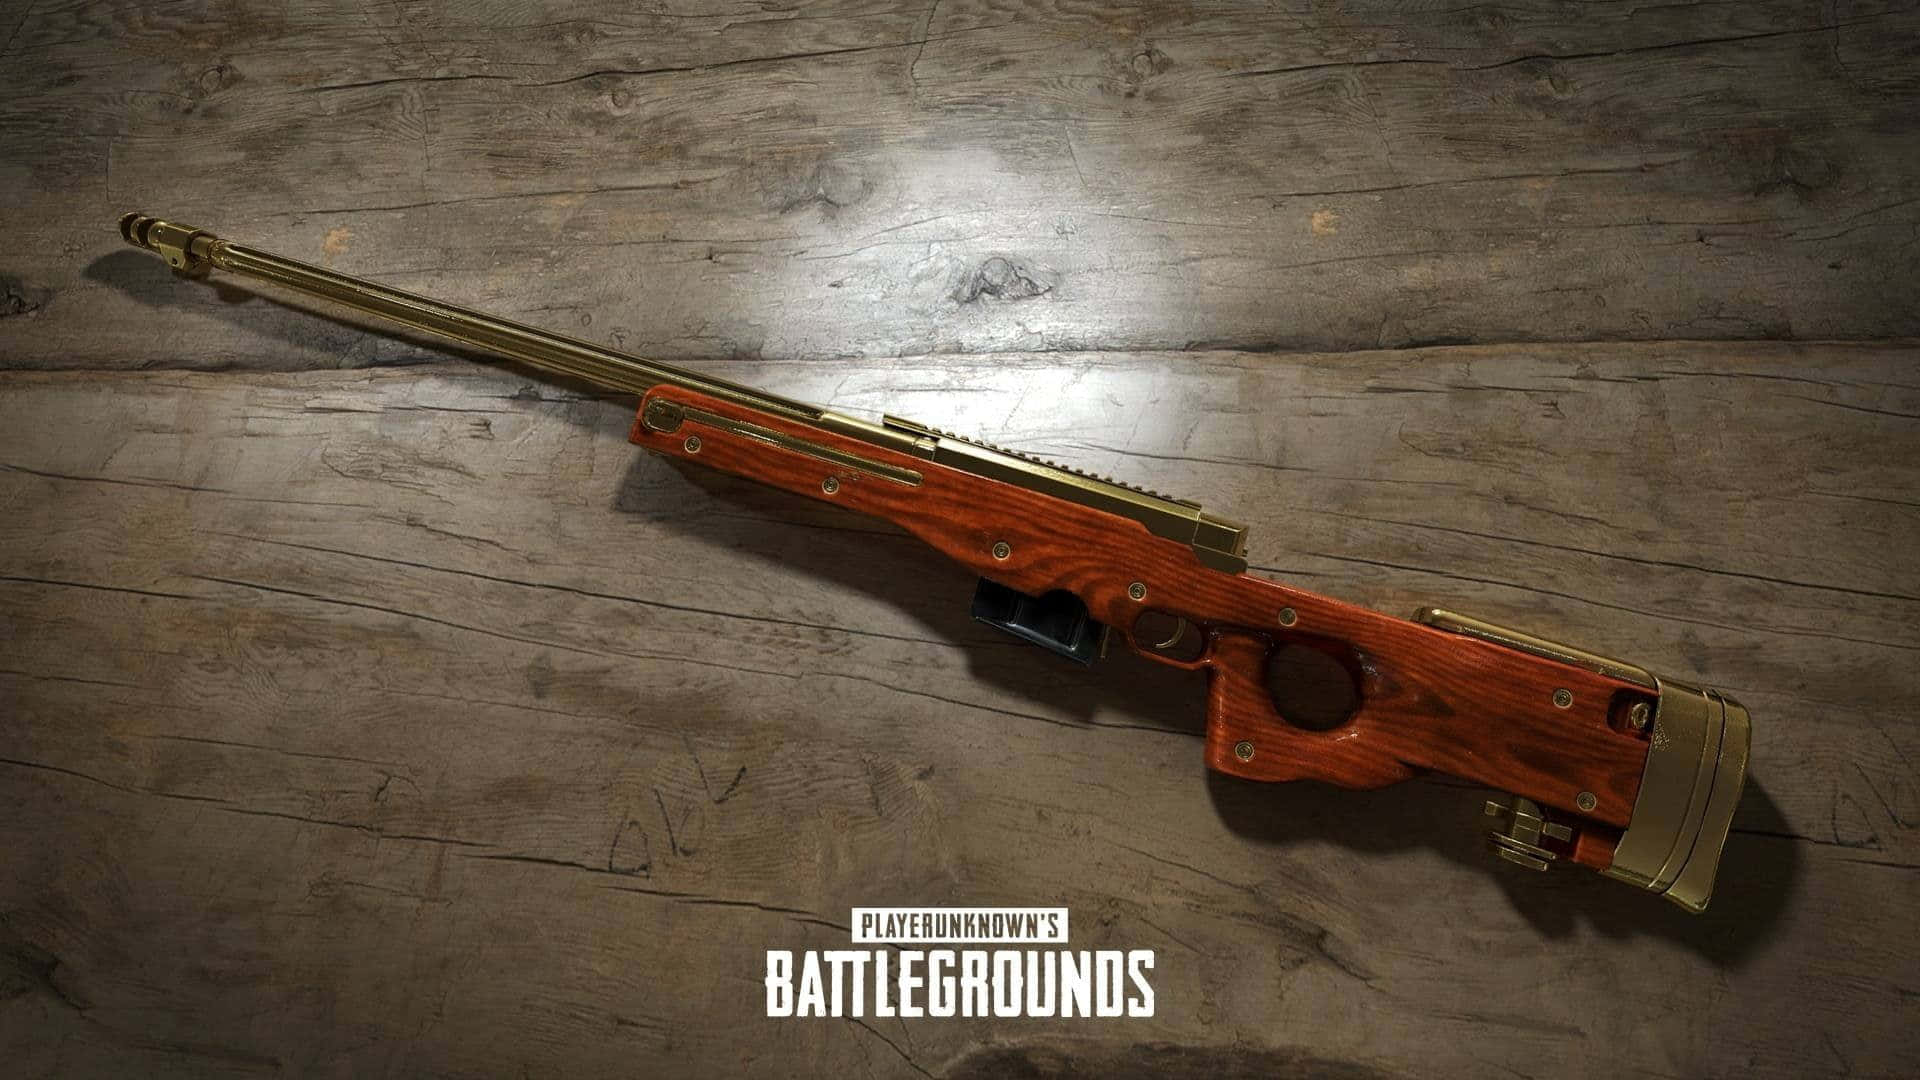 A Wooden Rifle On A Wooden Floor